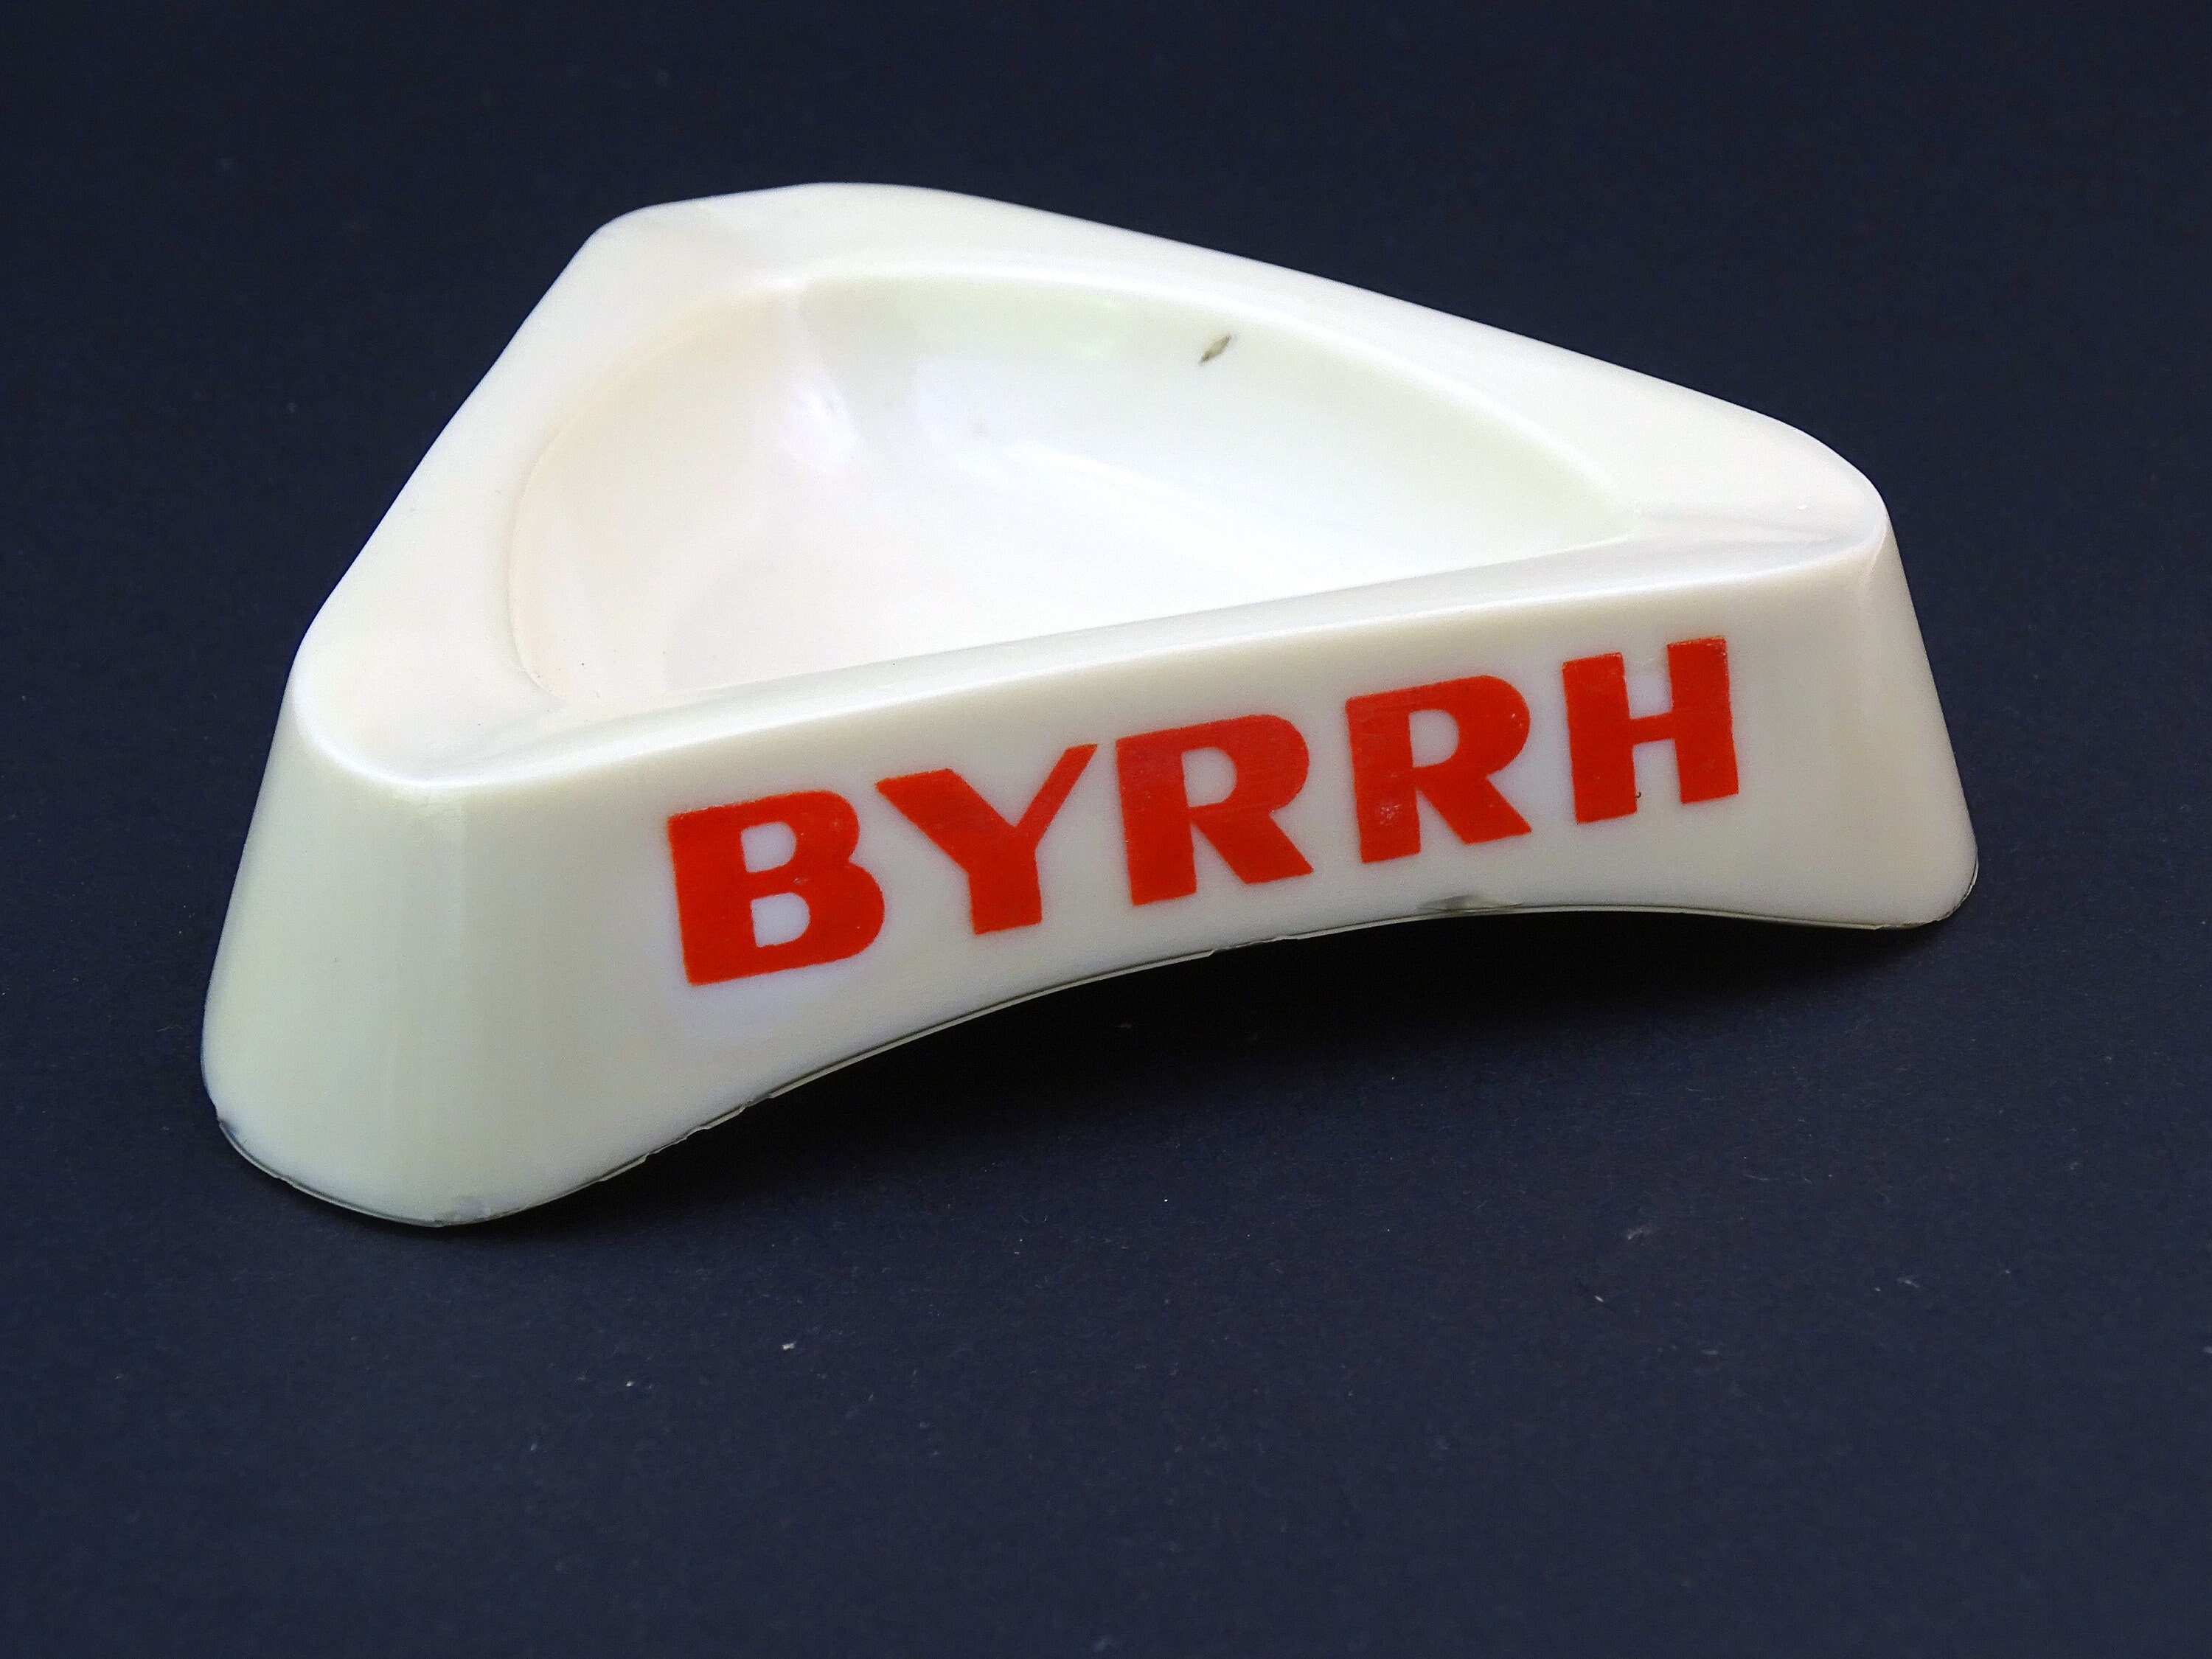 Vintage French 1950s Promotional Triangular White Milk Glass Ashtray for  Byrrh, Retro Smoking Accessory from France, Upcycled Ring Dish